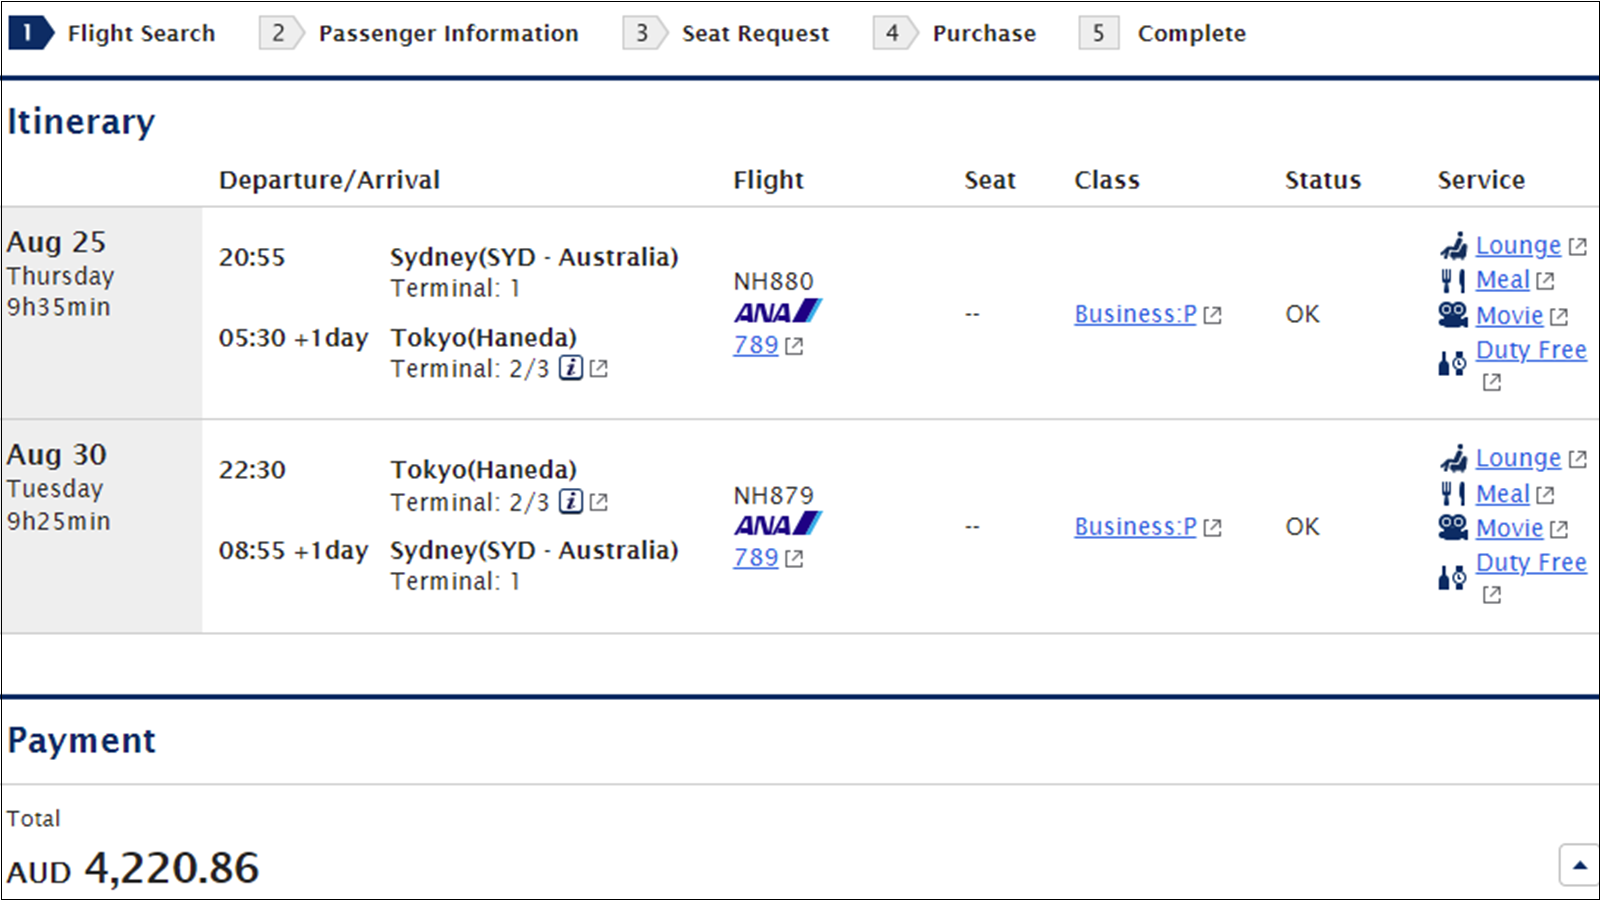 ANA Business Class fare pricing from Sydney to Tokyo